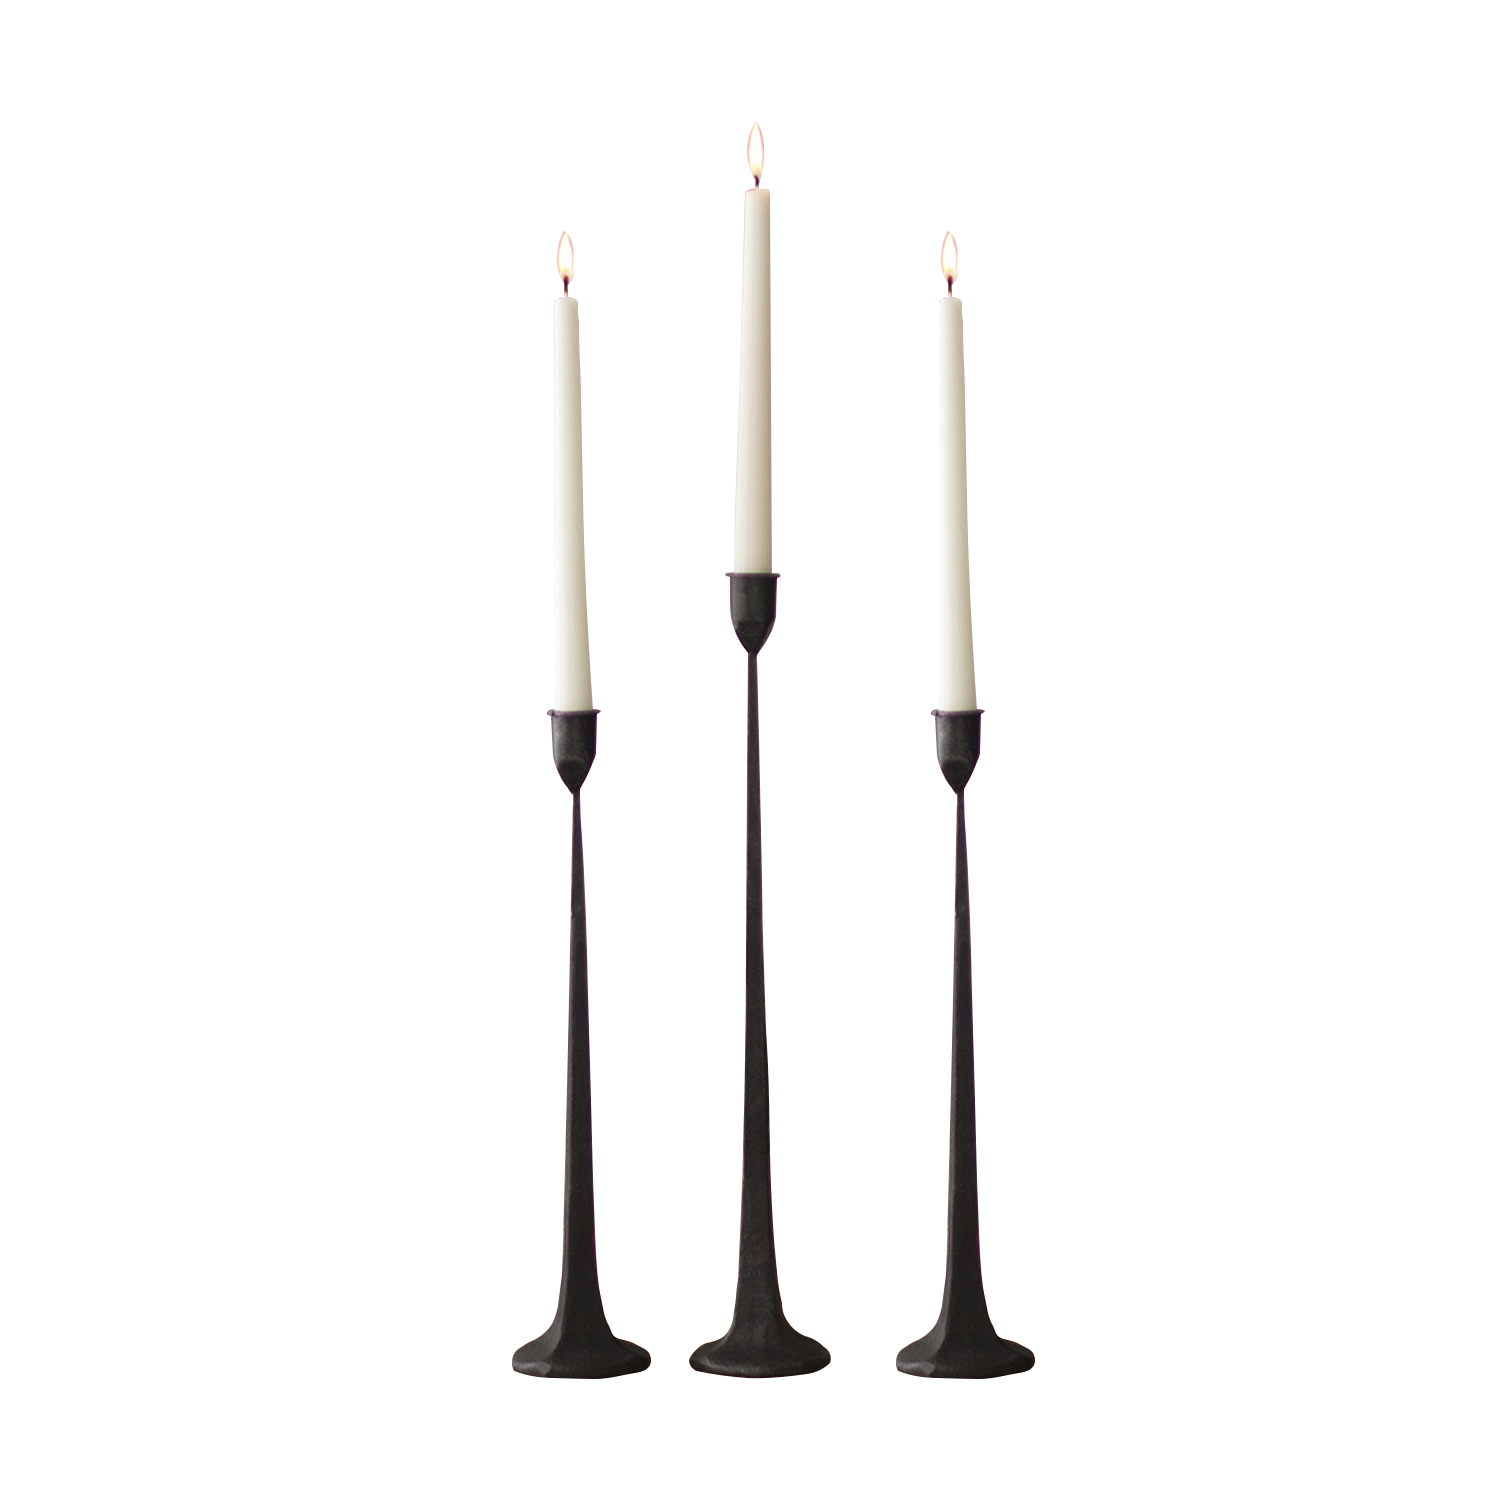 Tall Rustic Black Cast Iron Taper Candle Holders - Set of 3